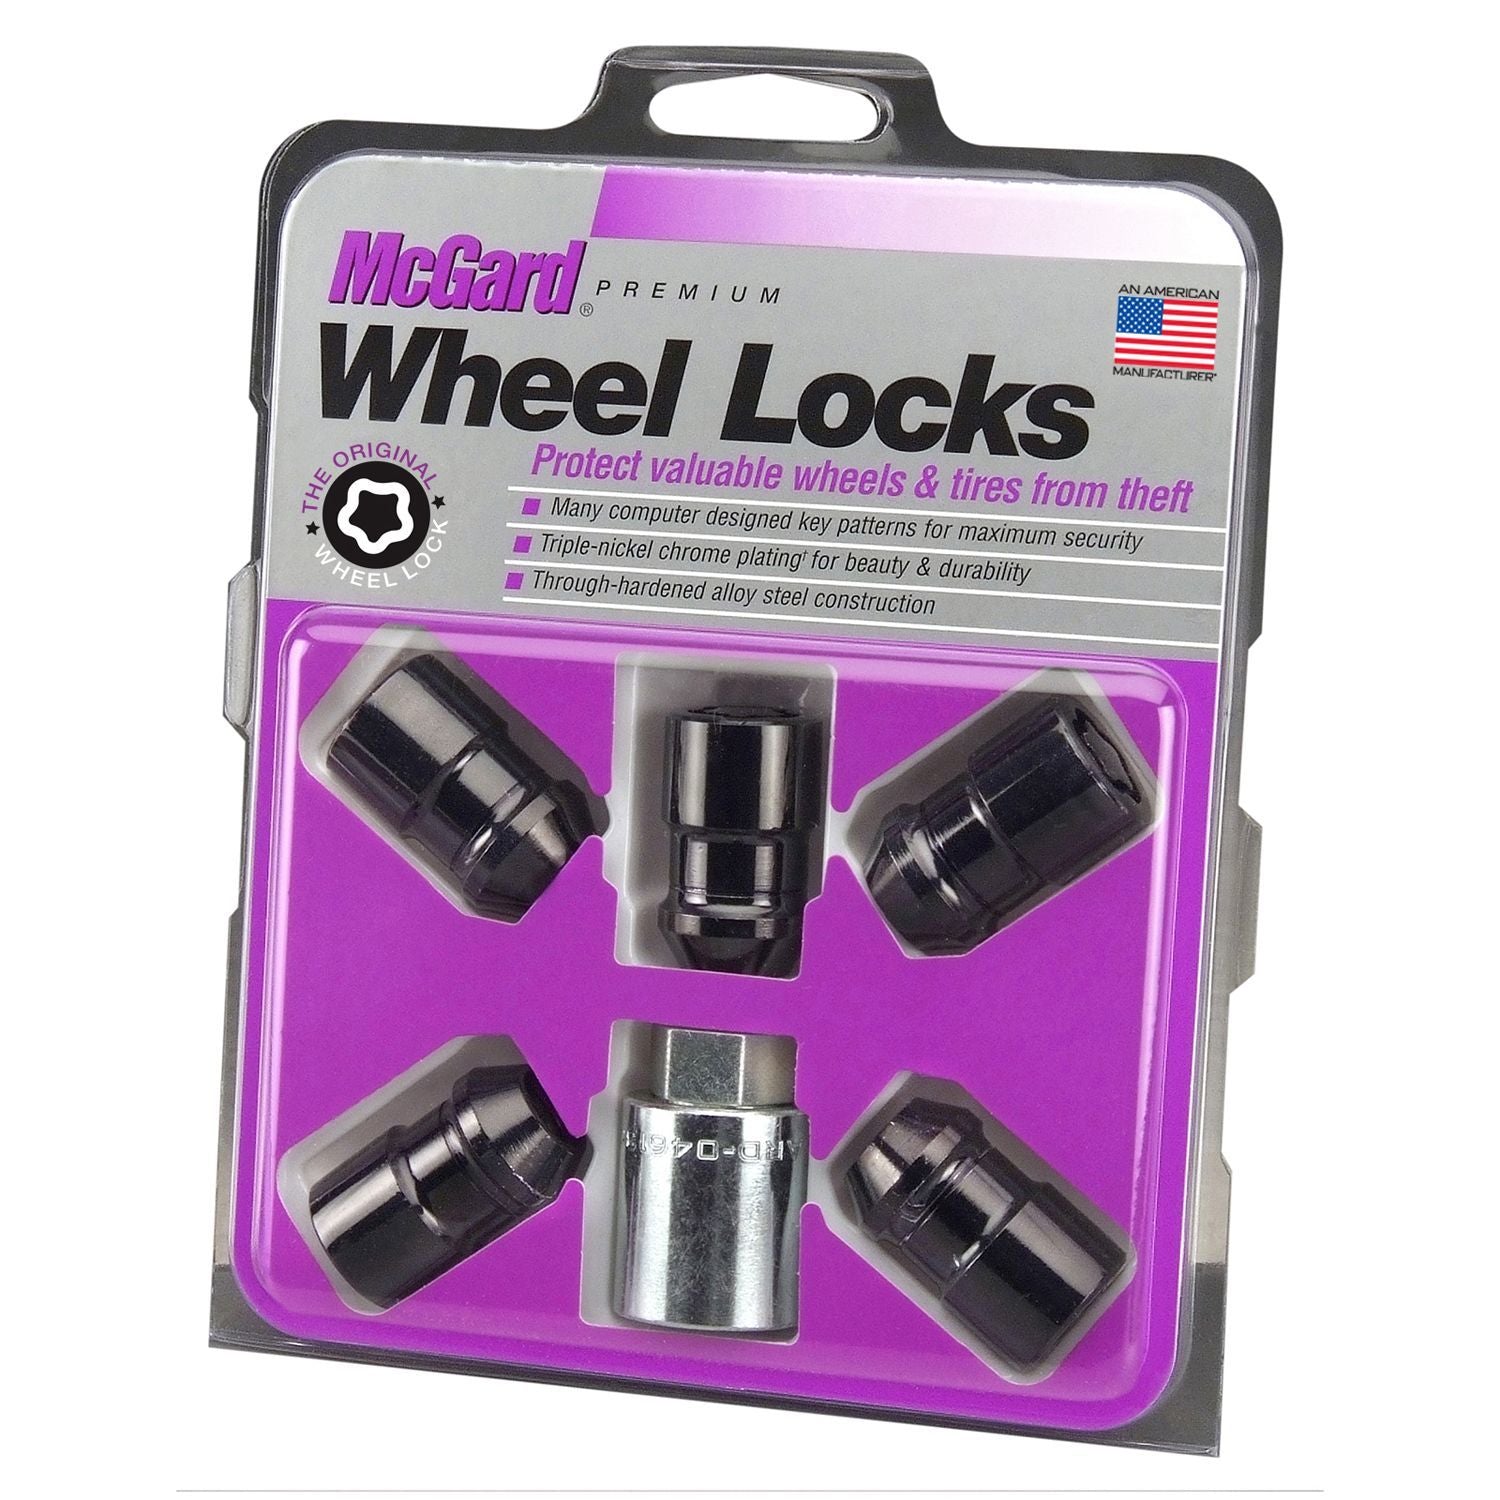 Black Cone Seat Wheel Lock (Set of 5) 1.46" Overall Length 19mm Hex Key